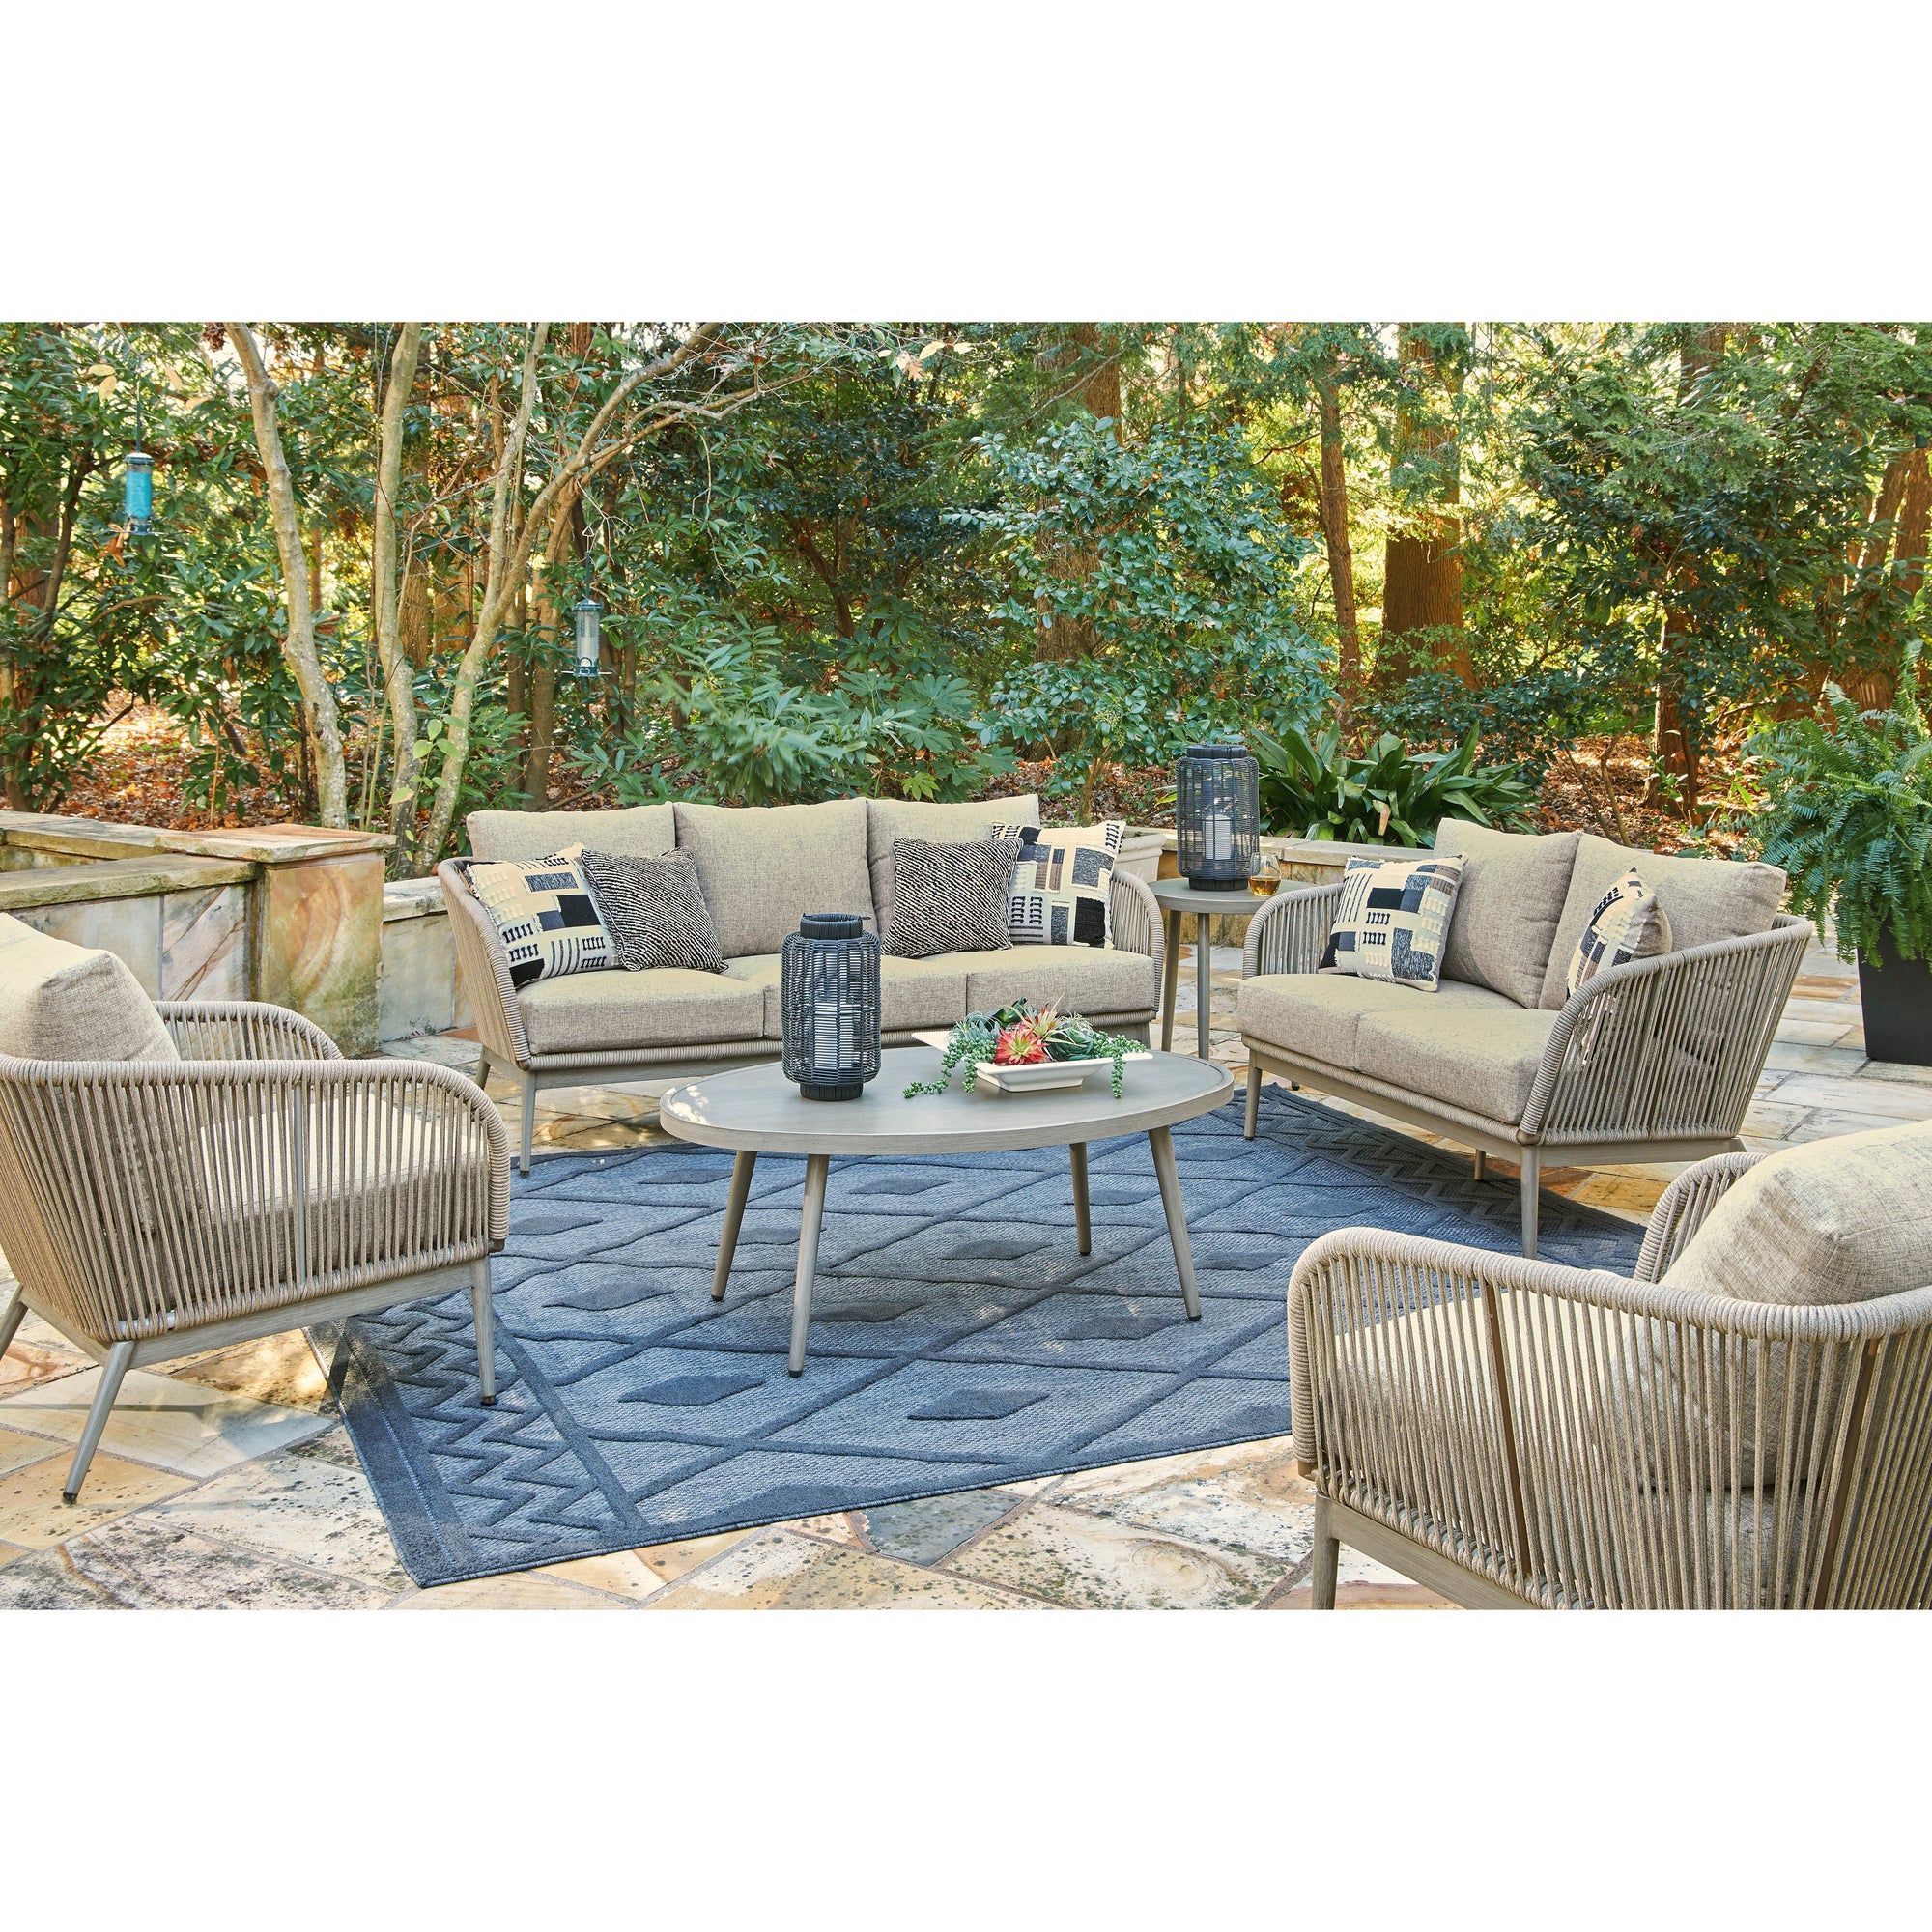 Rope Outdoor Seating Sets - New